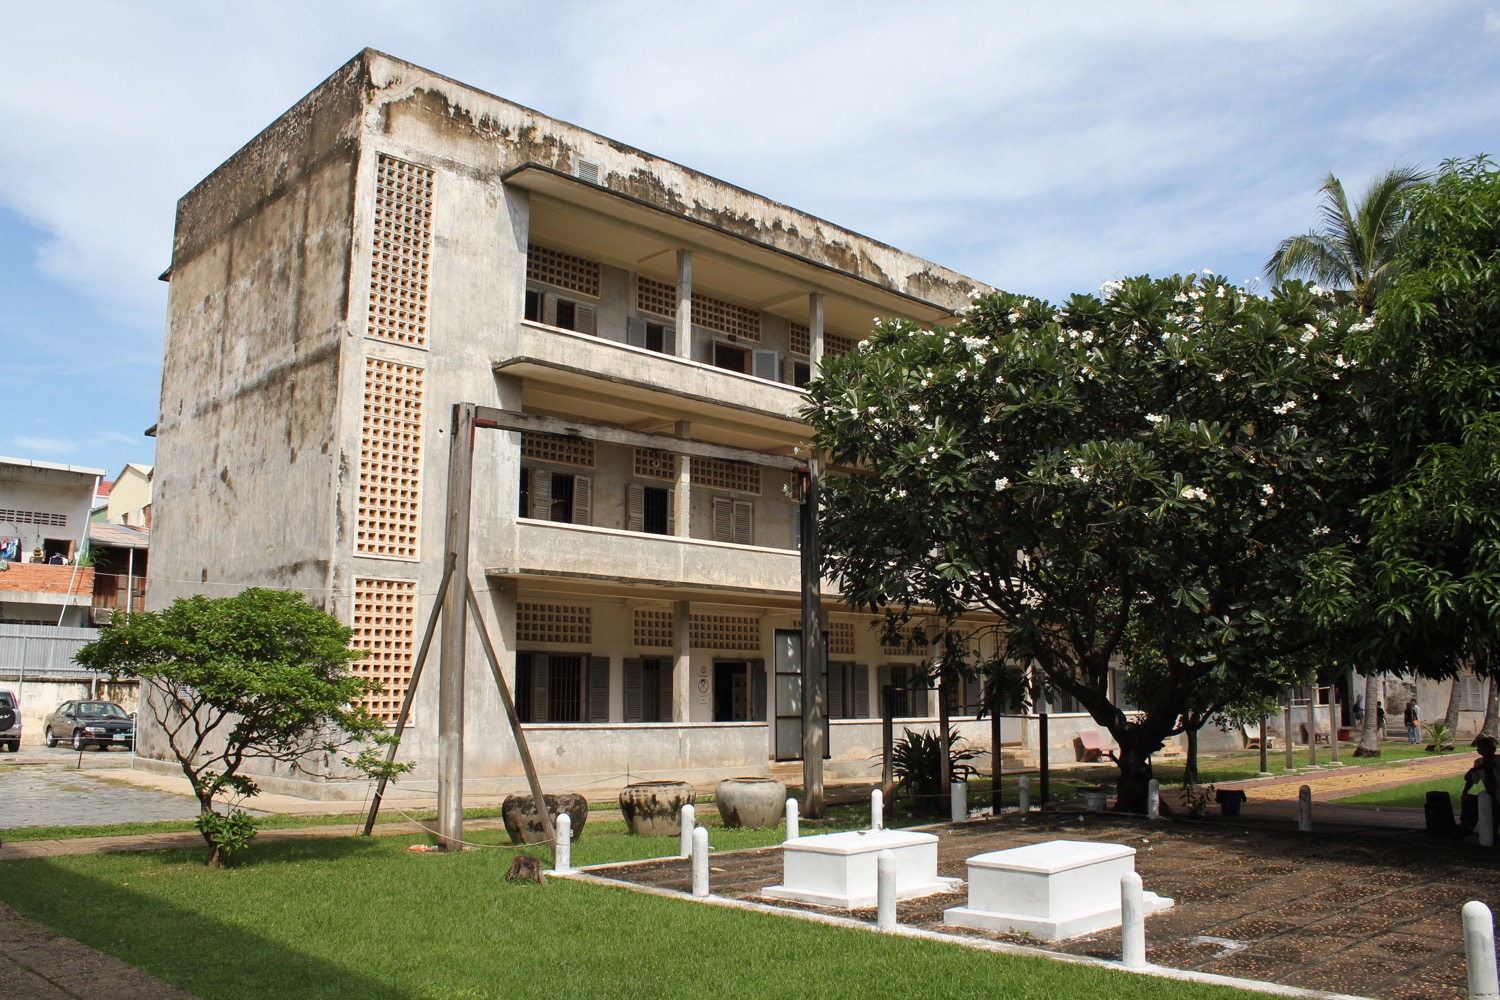 Tuol Sleng Genocide Museum - 5